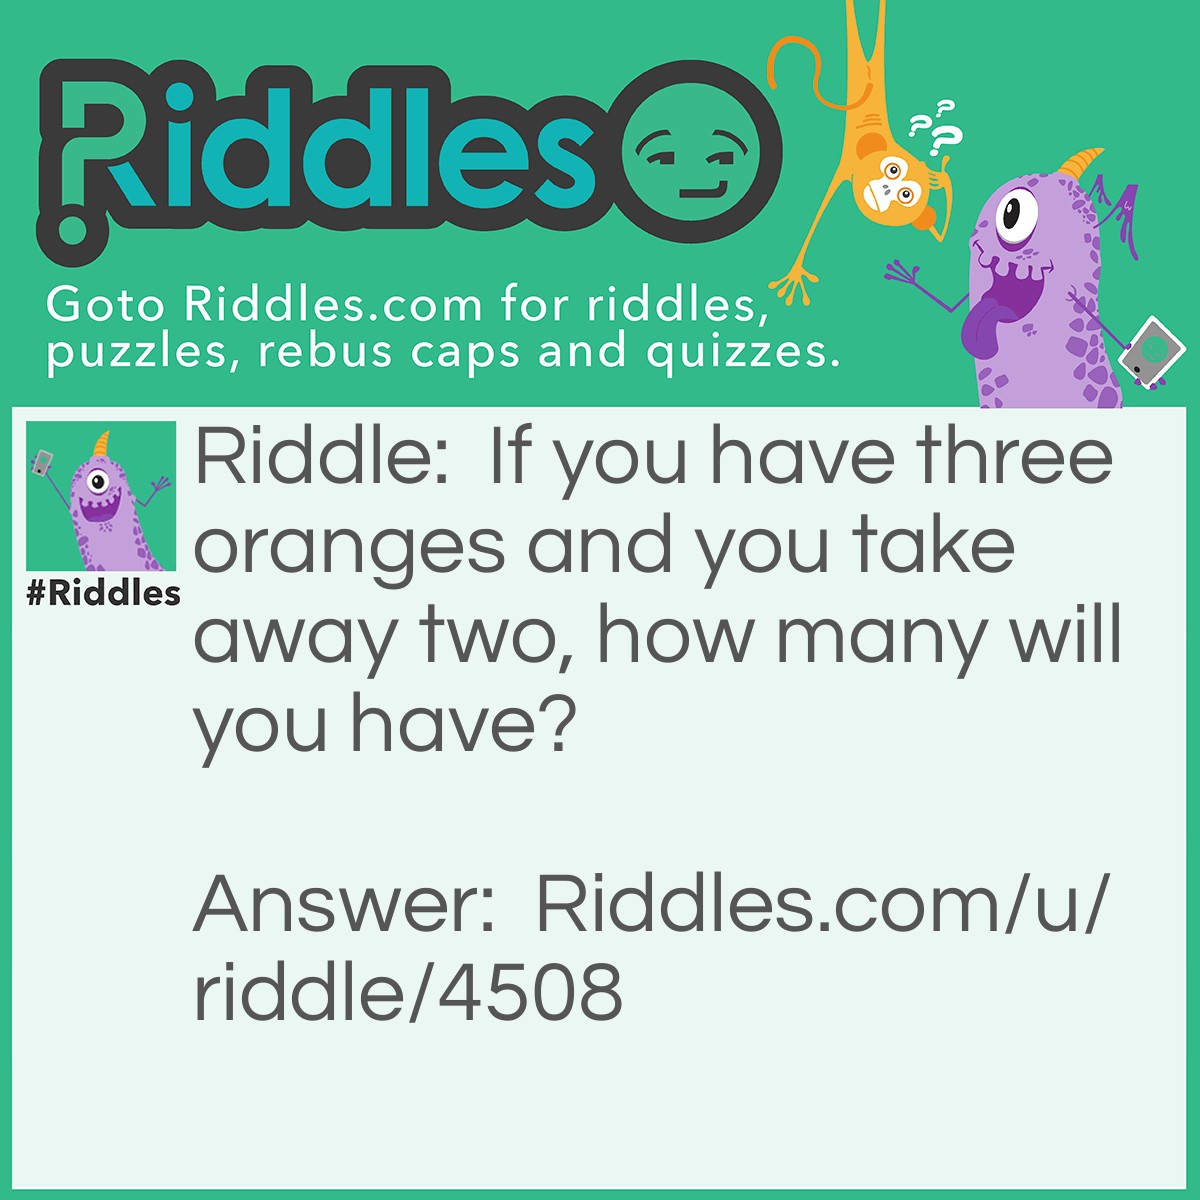 Riddle: If you have three oranges and you take away two, how many will you have? Answer: 2 oranges, because I just take away 2.